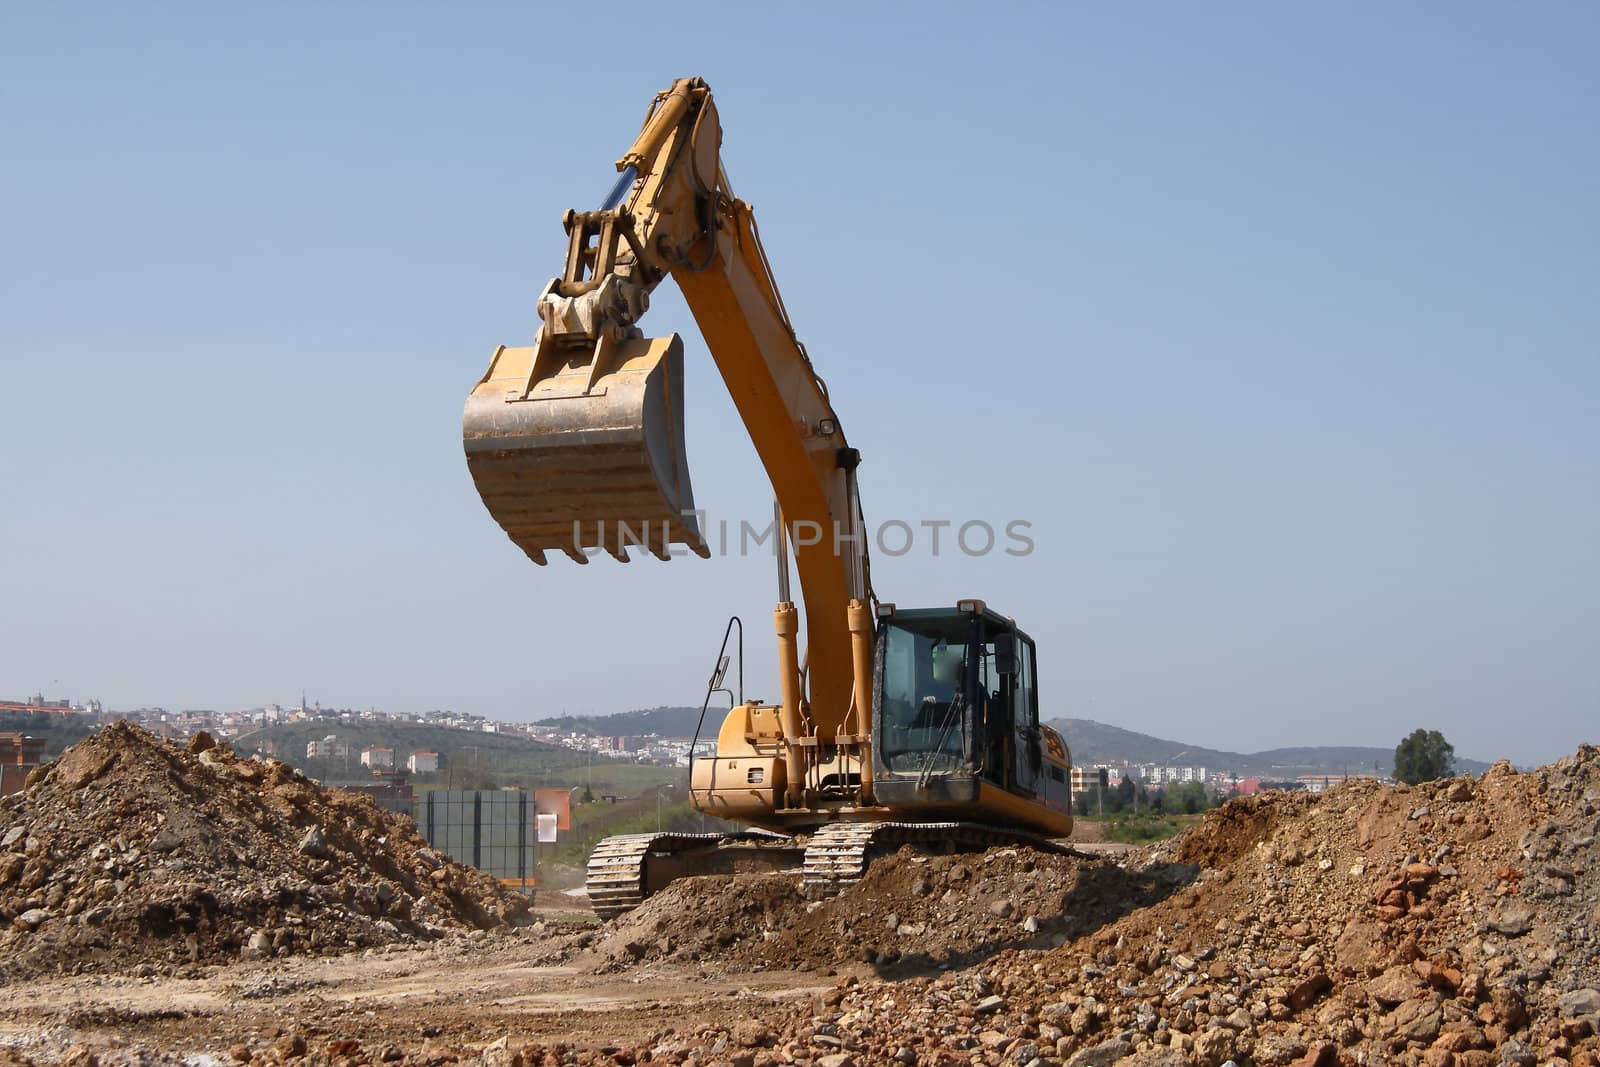 backhoe chains of working in an earthmoving